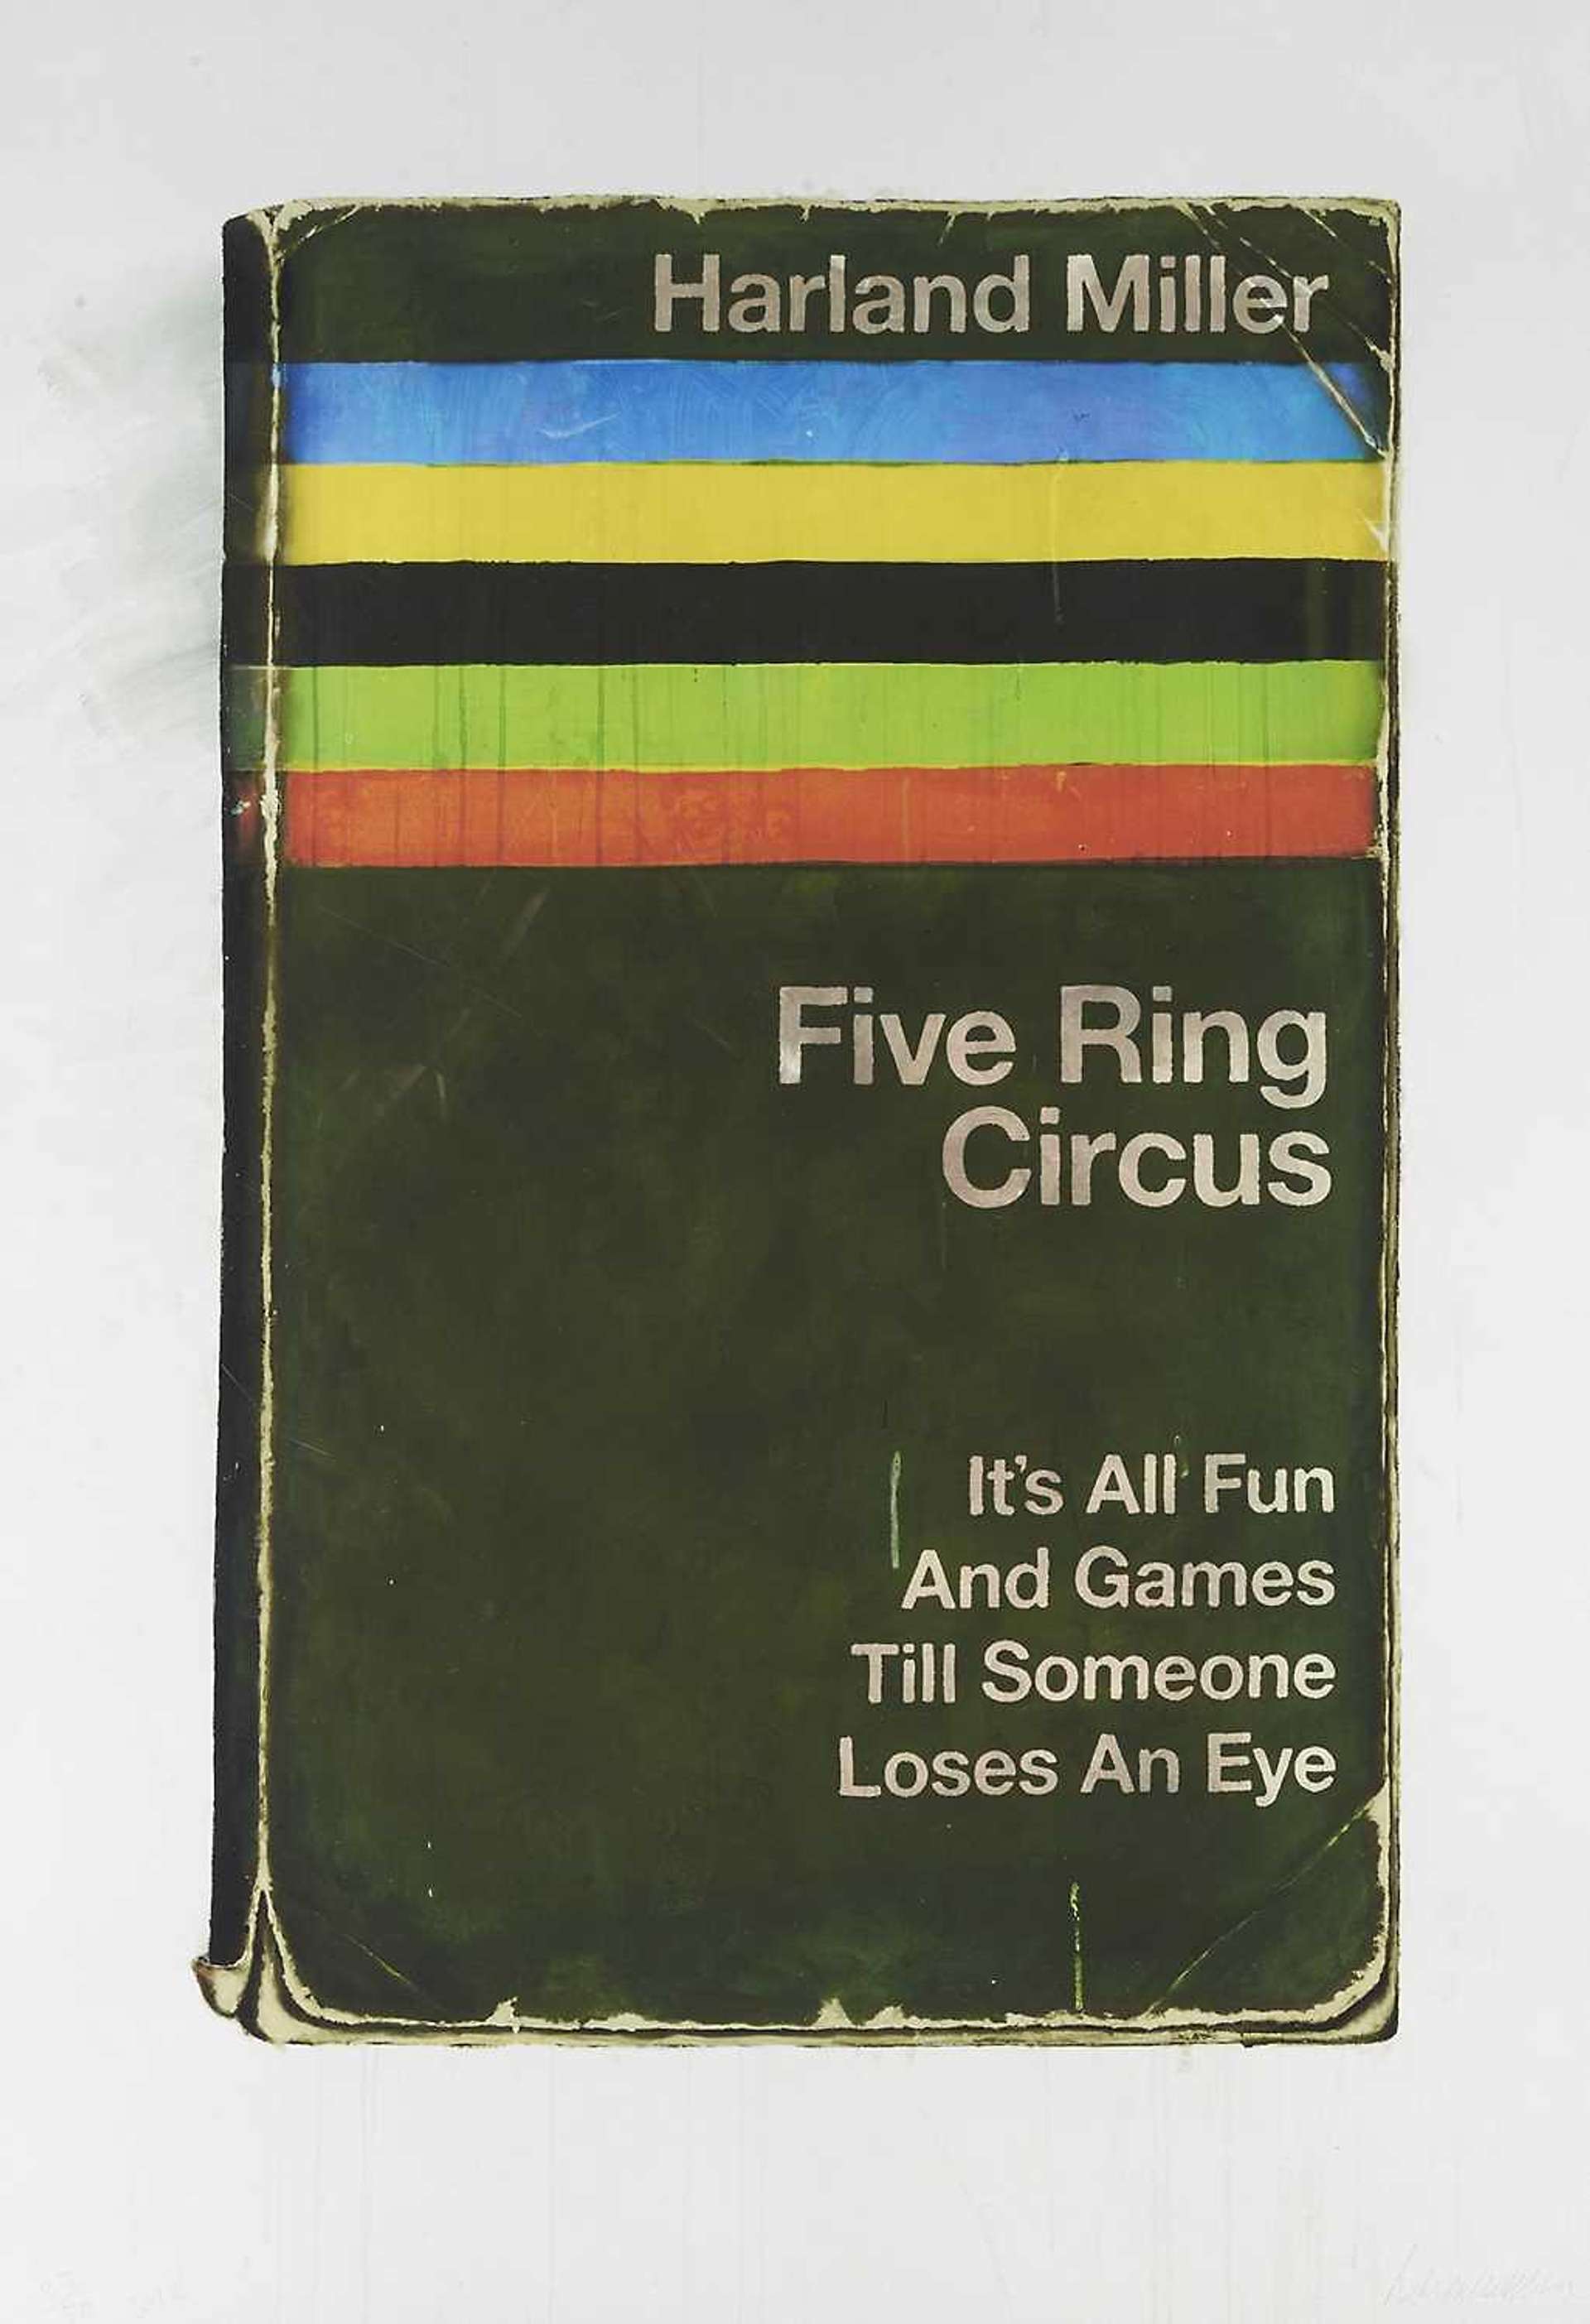 Five Ring Circus (It's All Fun and Games Till Someone Loses an Eye) by Harland Miller